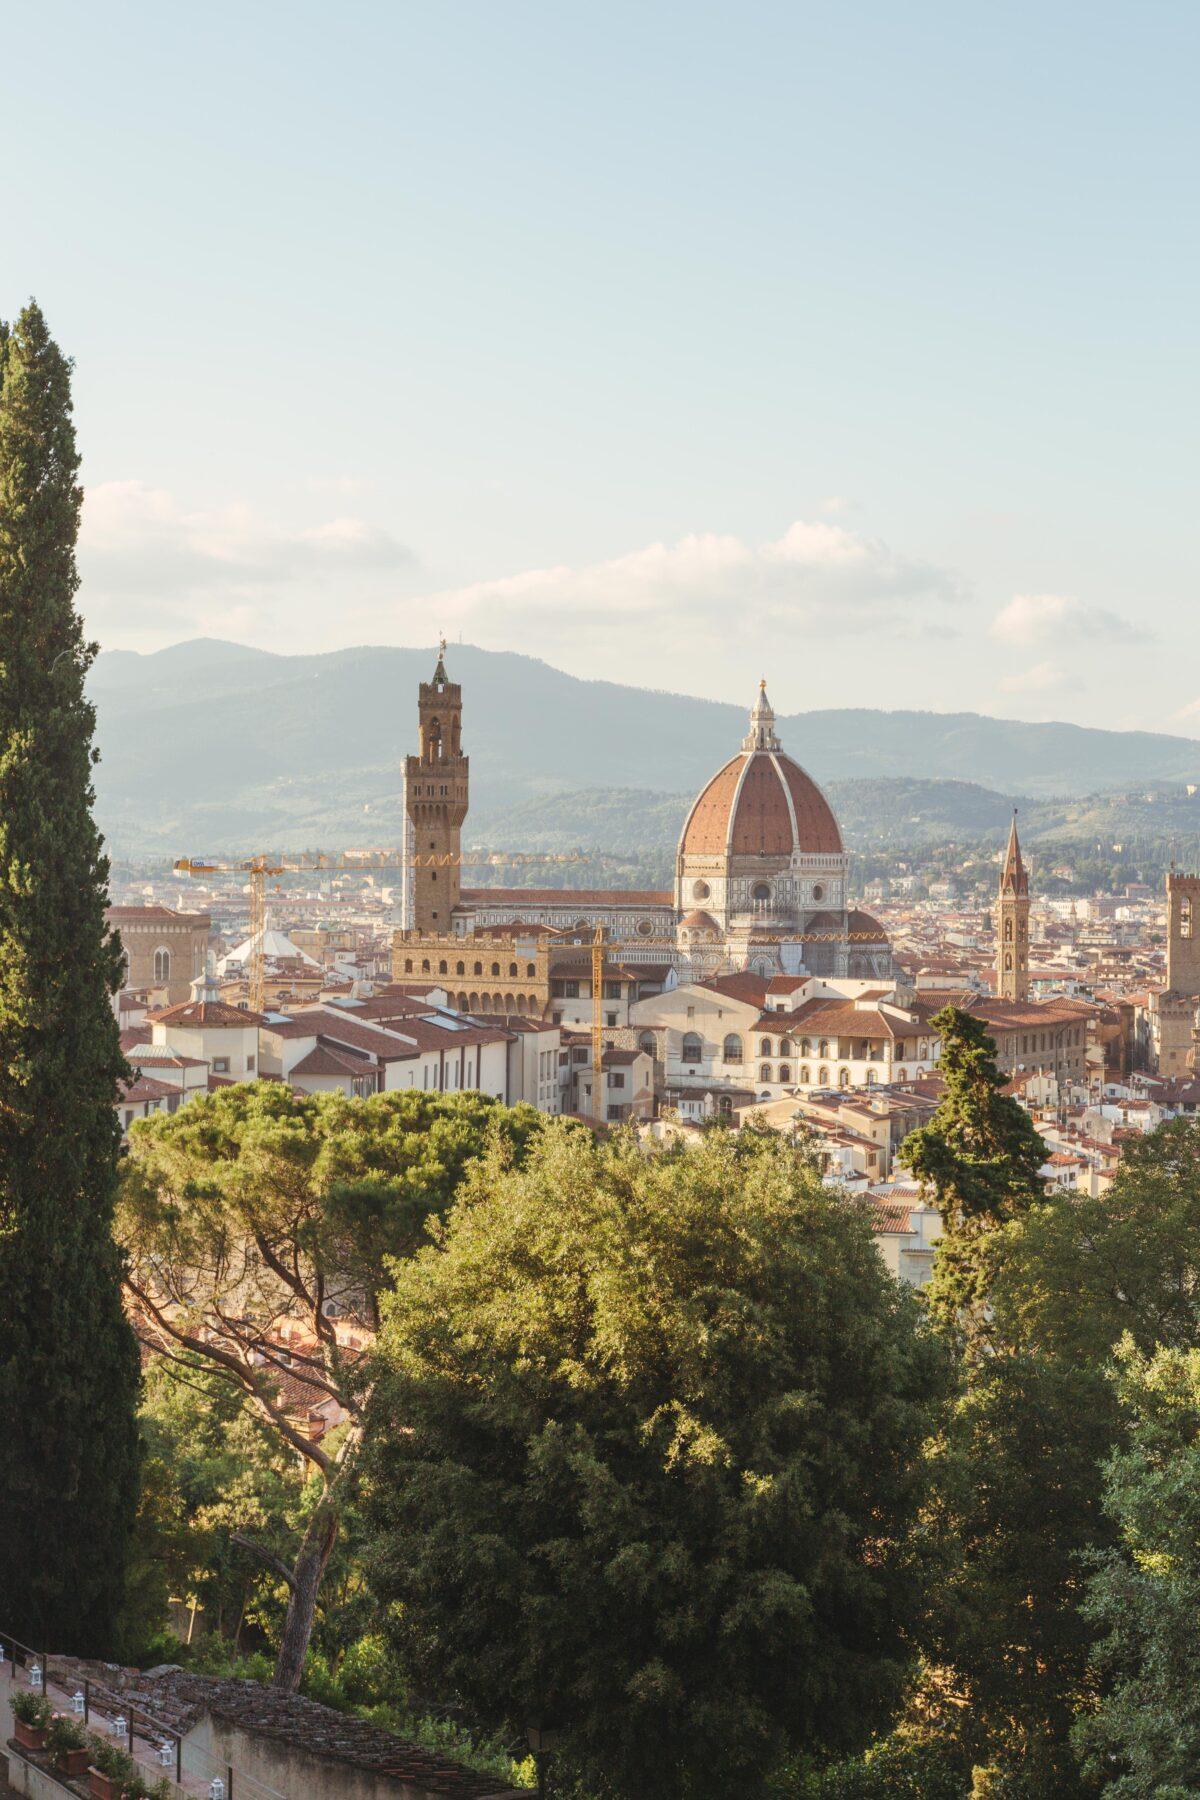 The construction of the cathedral started in the late 13th century; the dome was added in the 15th century. (Giuseppe Mondì/Unsplash)